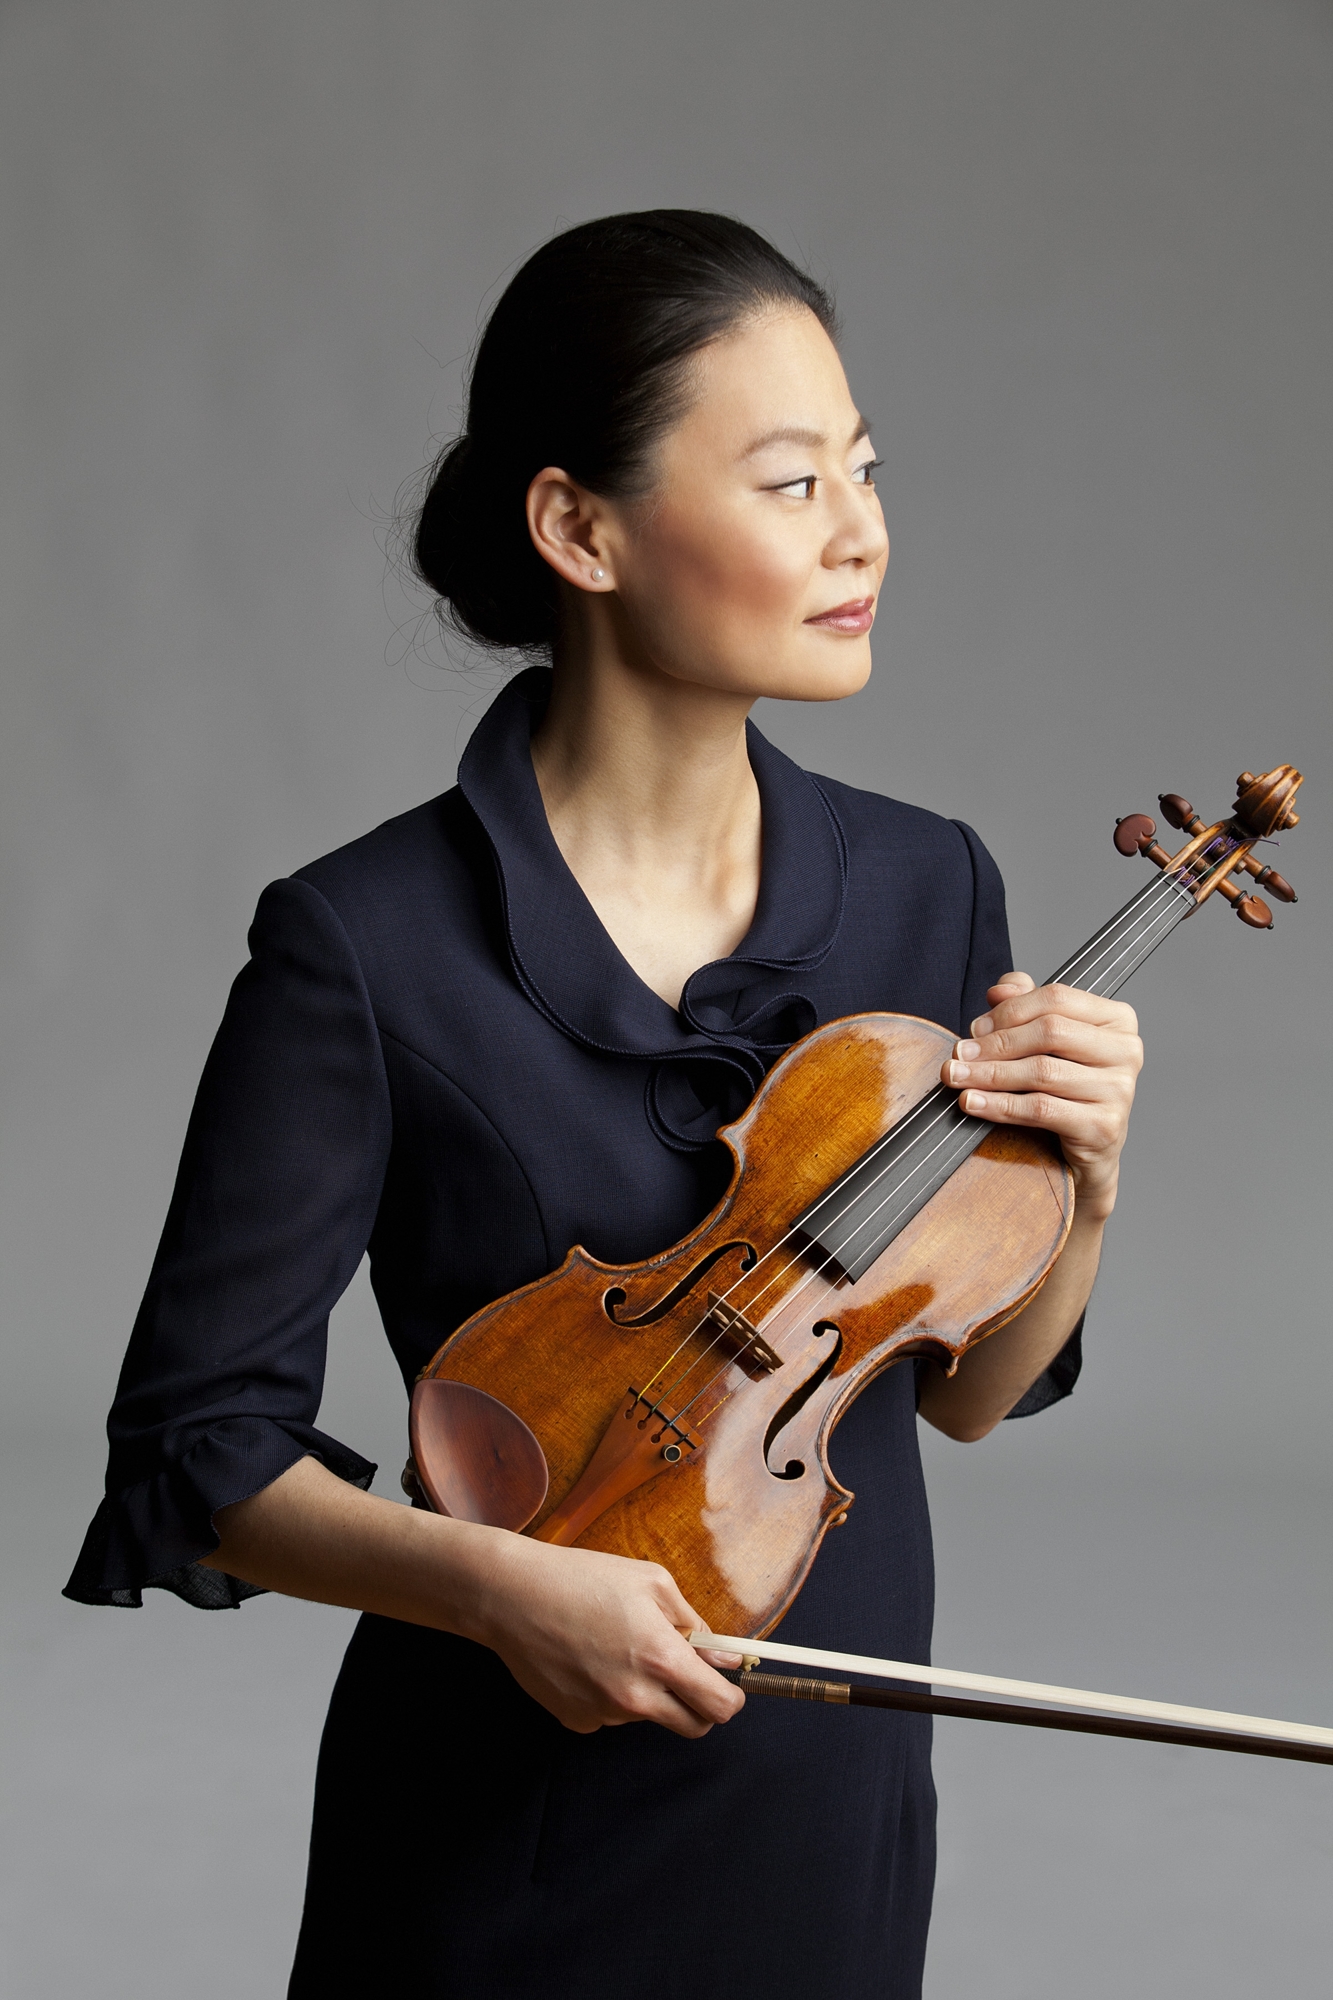 Legendary violinist Midori joined Sarasota Orchestra for a concert honoring the 100th anniversary of composer Leonard Bernstein’s birth. Courtesy photo